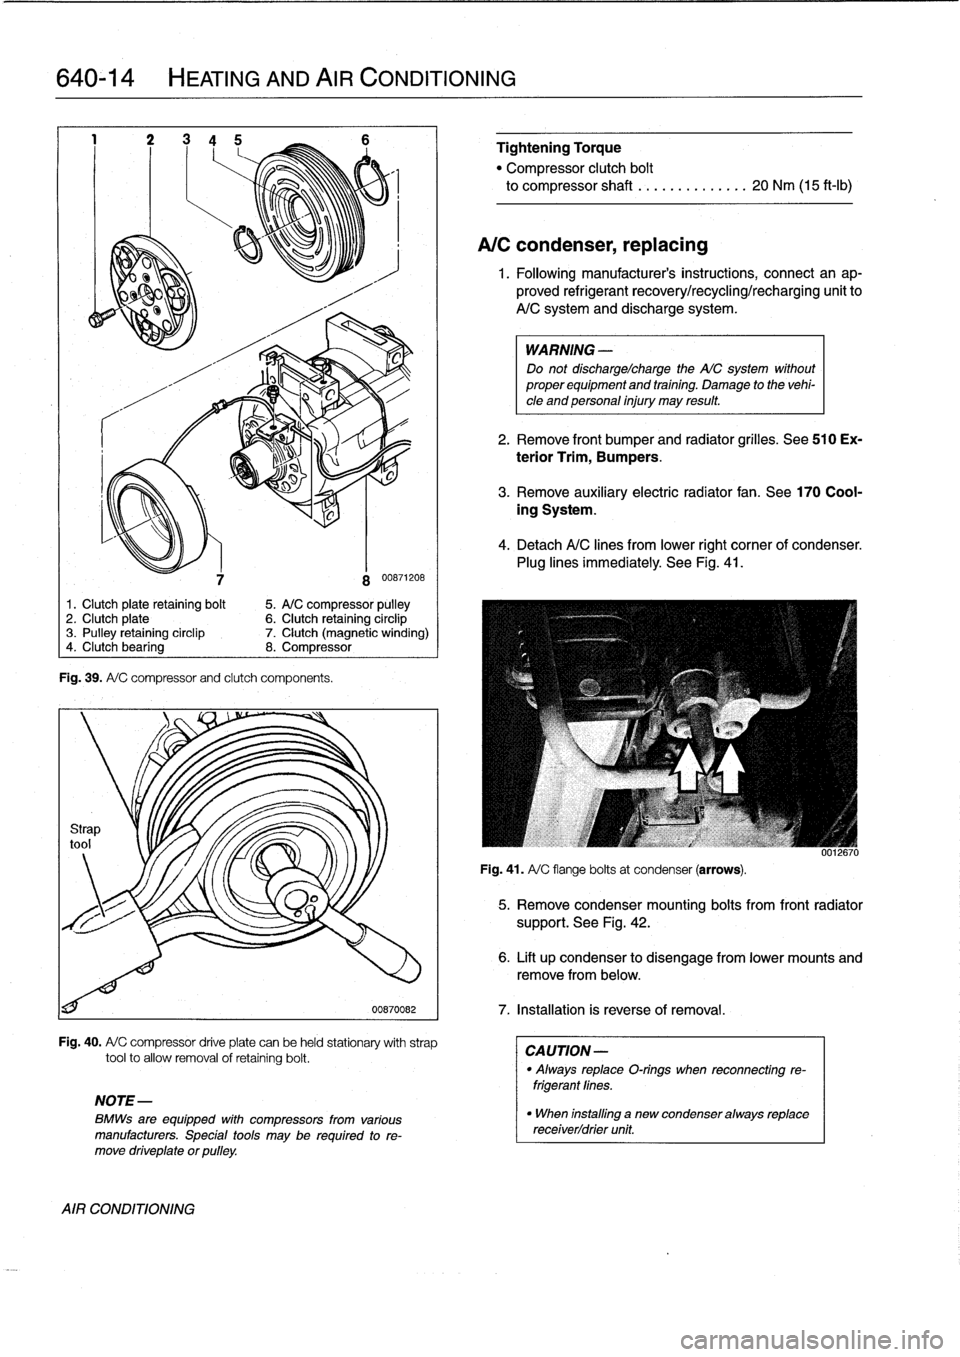 BMW 328i 1998 E36 Owners Manual 
640-14

	

HEATING
AND
AIR
CONDITIONING

7
Fig
.
39
.
A/
C
compressorand
clutch
components
.

8
00871208

1.
Clutch
plate
retaining
bolt

	

5
.
A/C
compressor
pulley
2
.
Clutch
plate

	

6
.
Clutch
